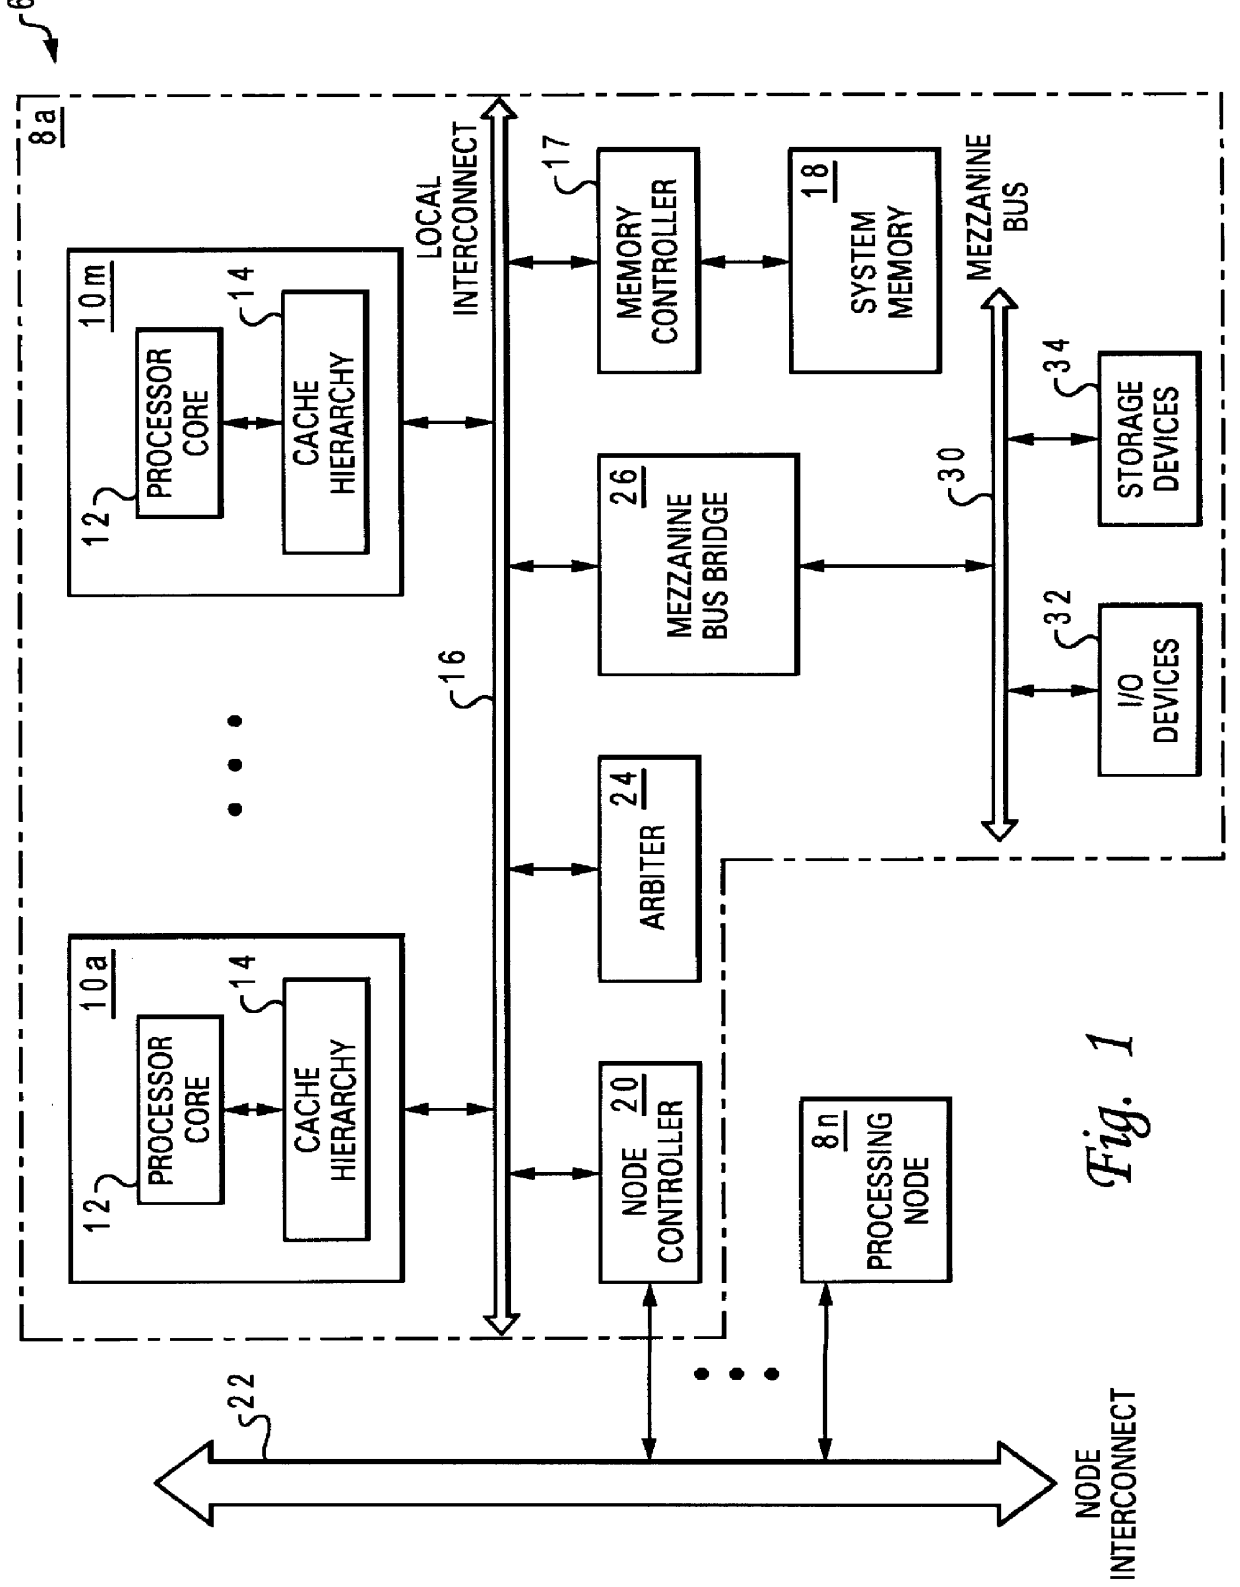 Non-uniform memory access (NUMA) data processing system with multiple caches concurrently holding data in a recent state from which data can be sourced by shared intervention